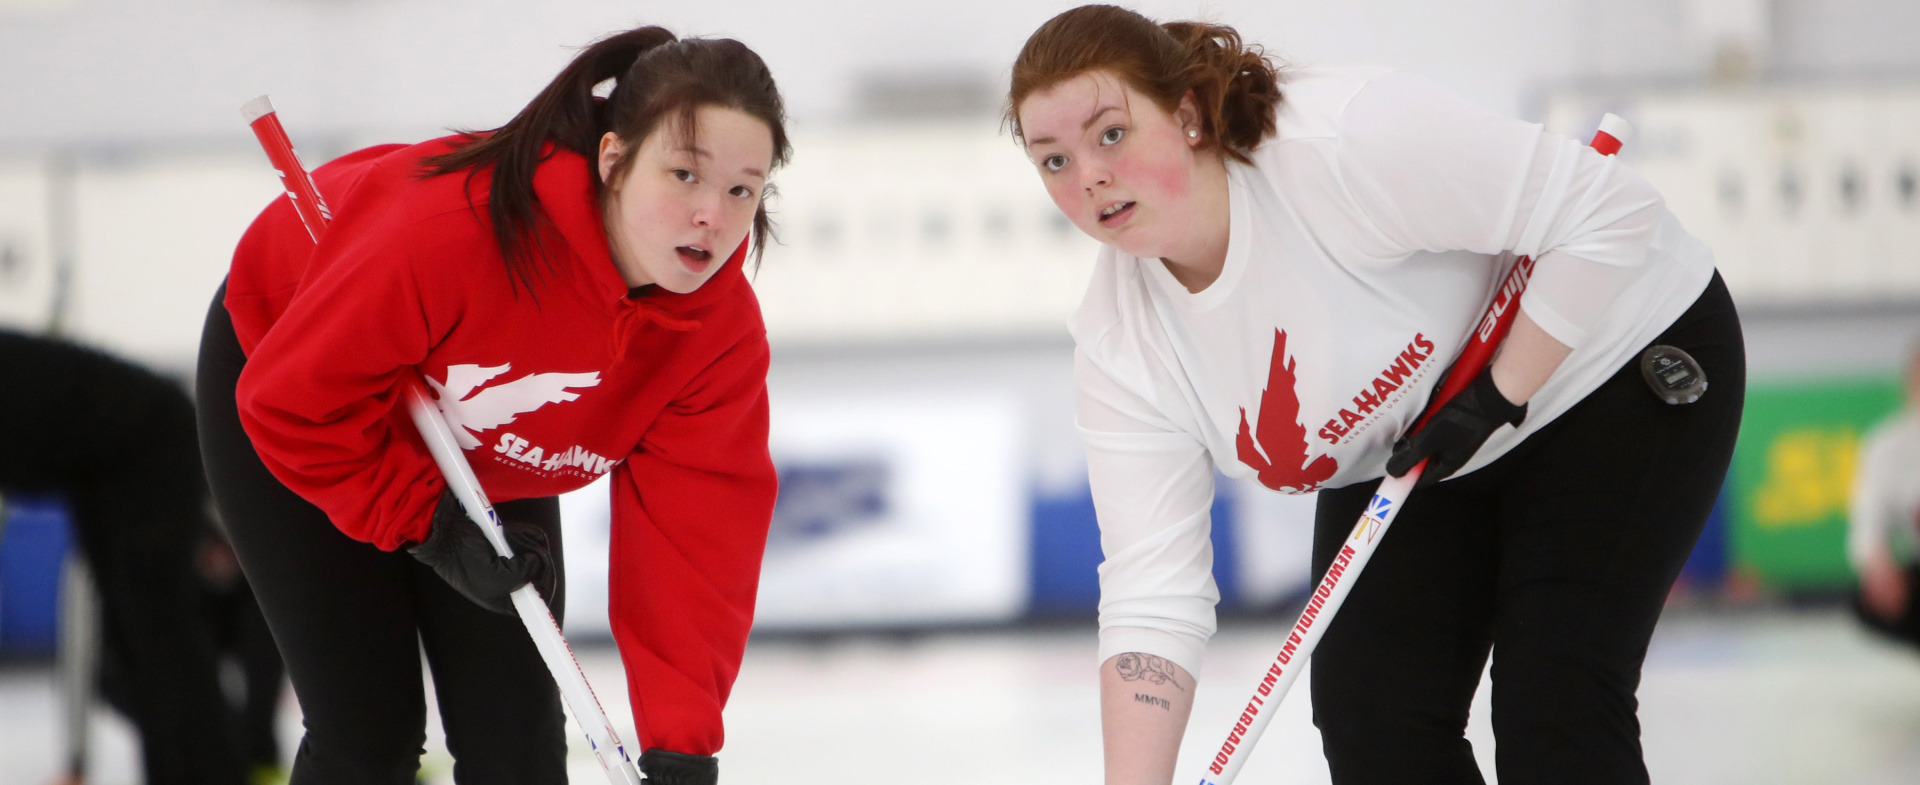 Hawks place 5th at AUS Curling Championship